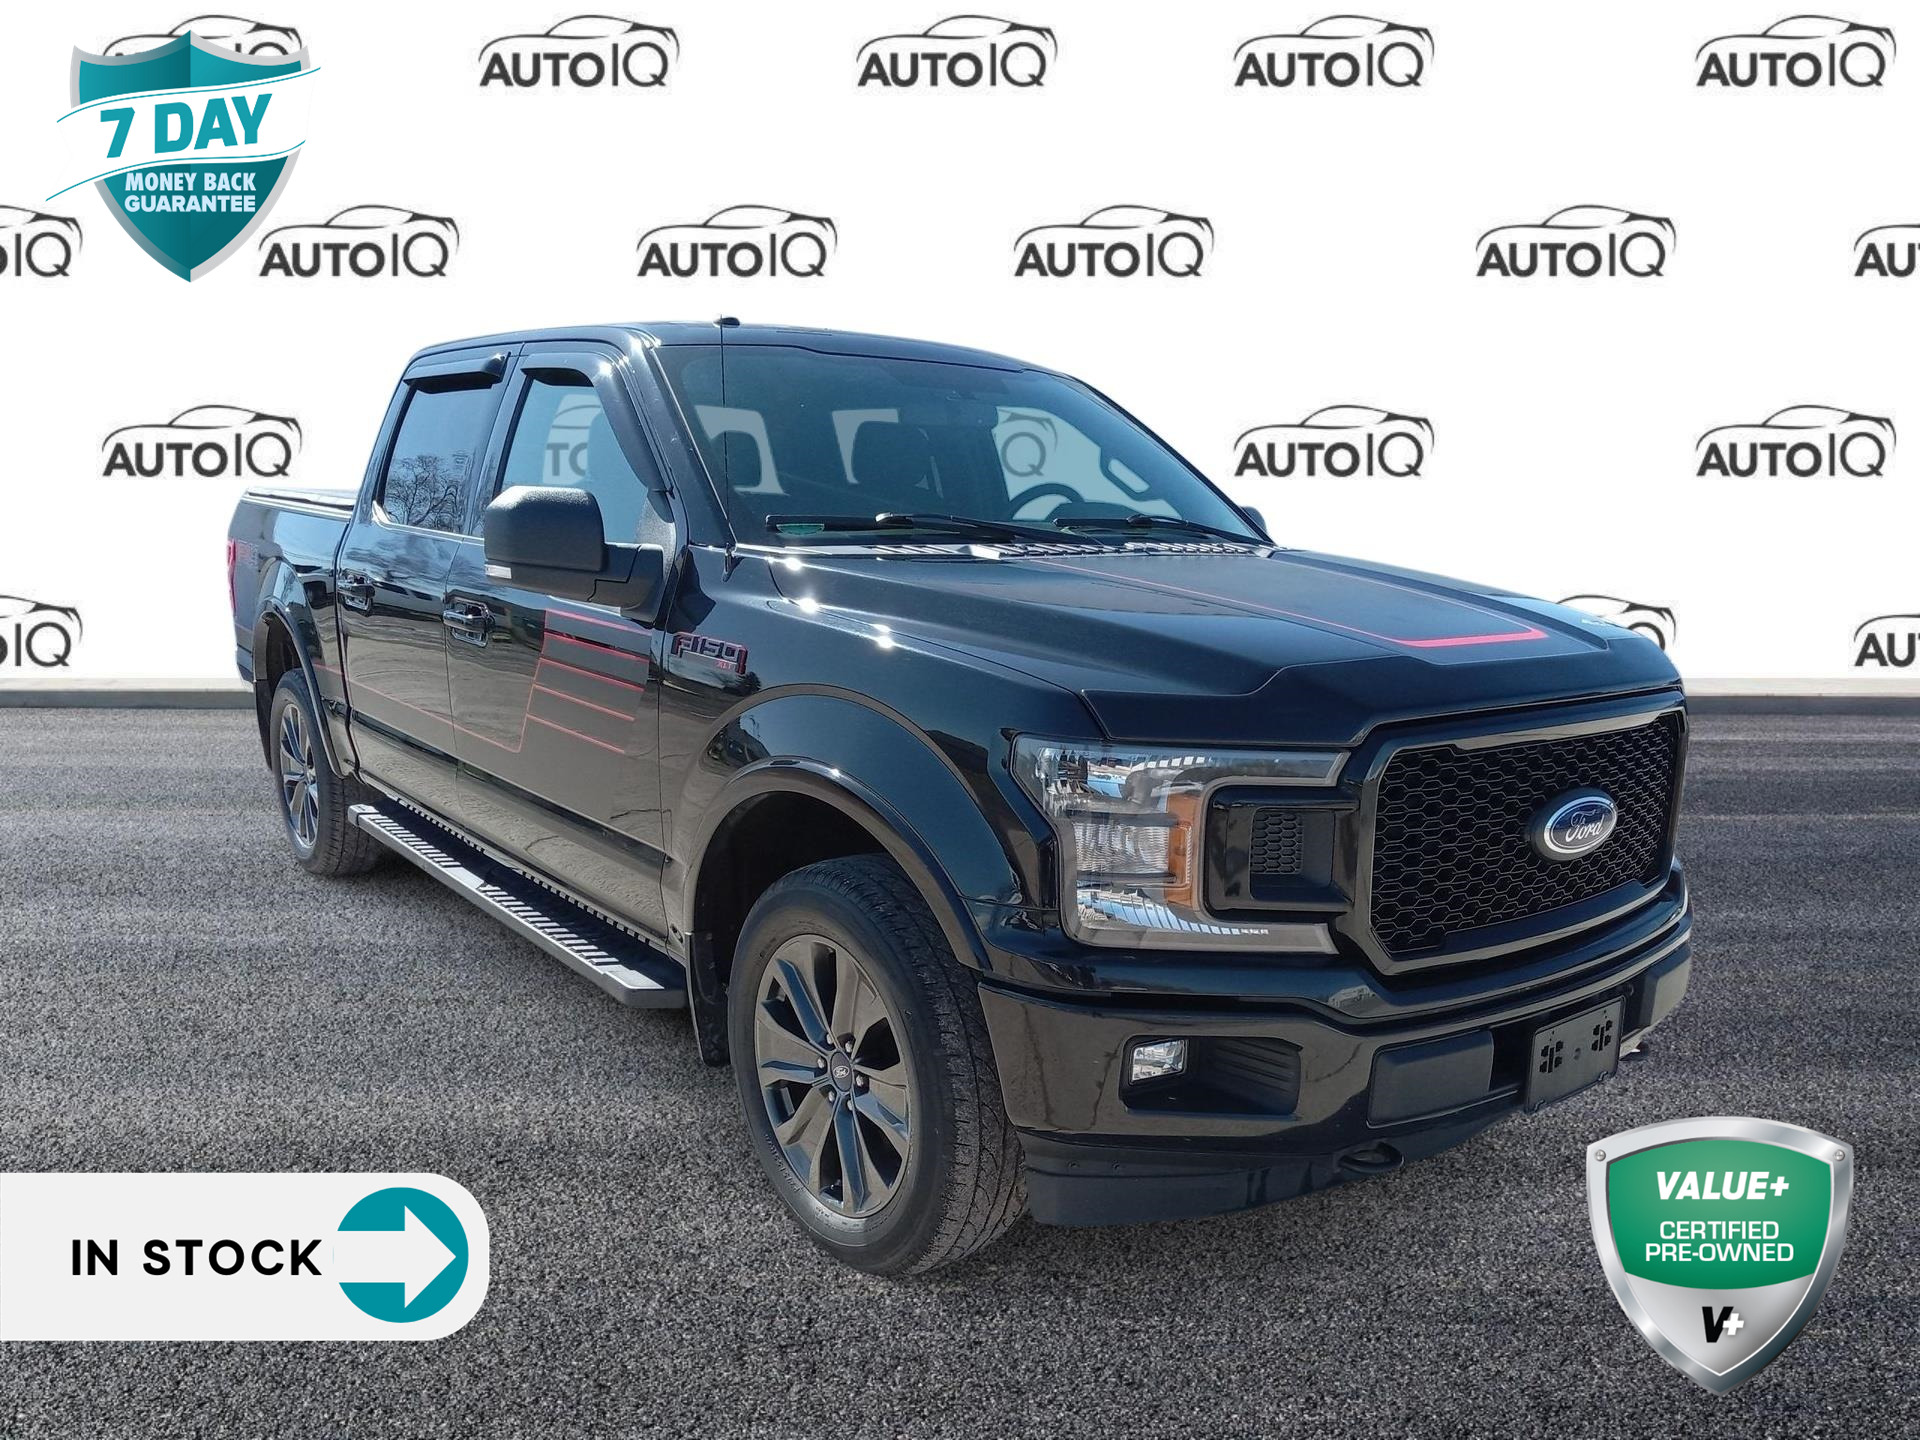 2018 Ford F-150 XLT 301A | FX4 OFF-ROAD PKG | XLT SPORT APPEARANCE